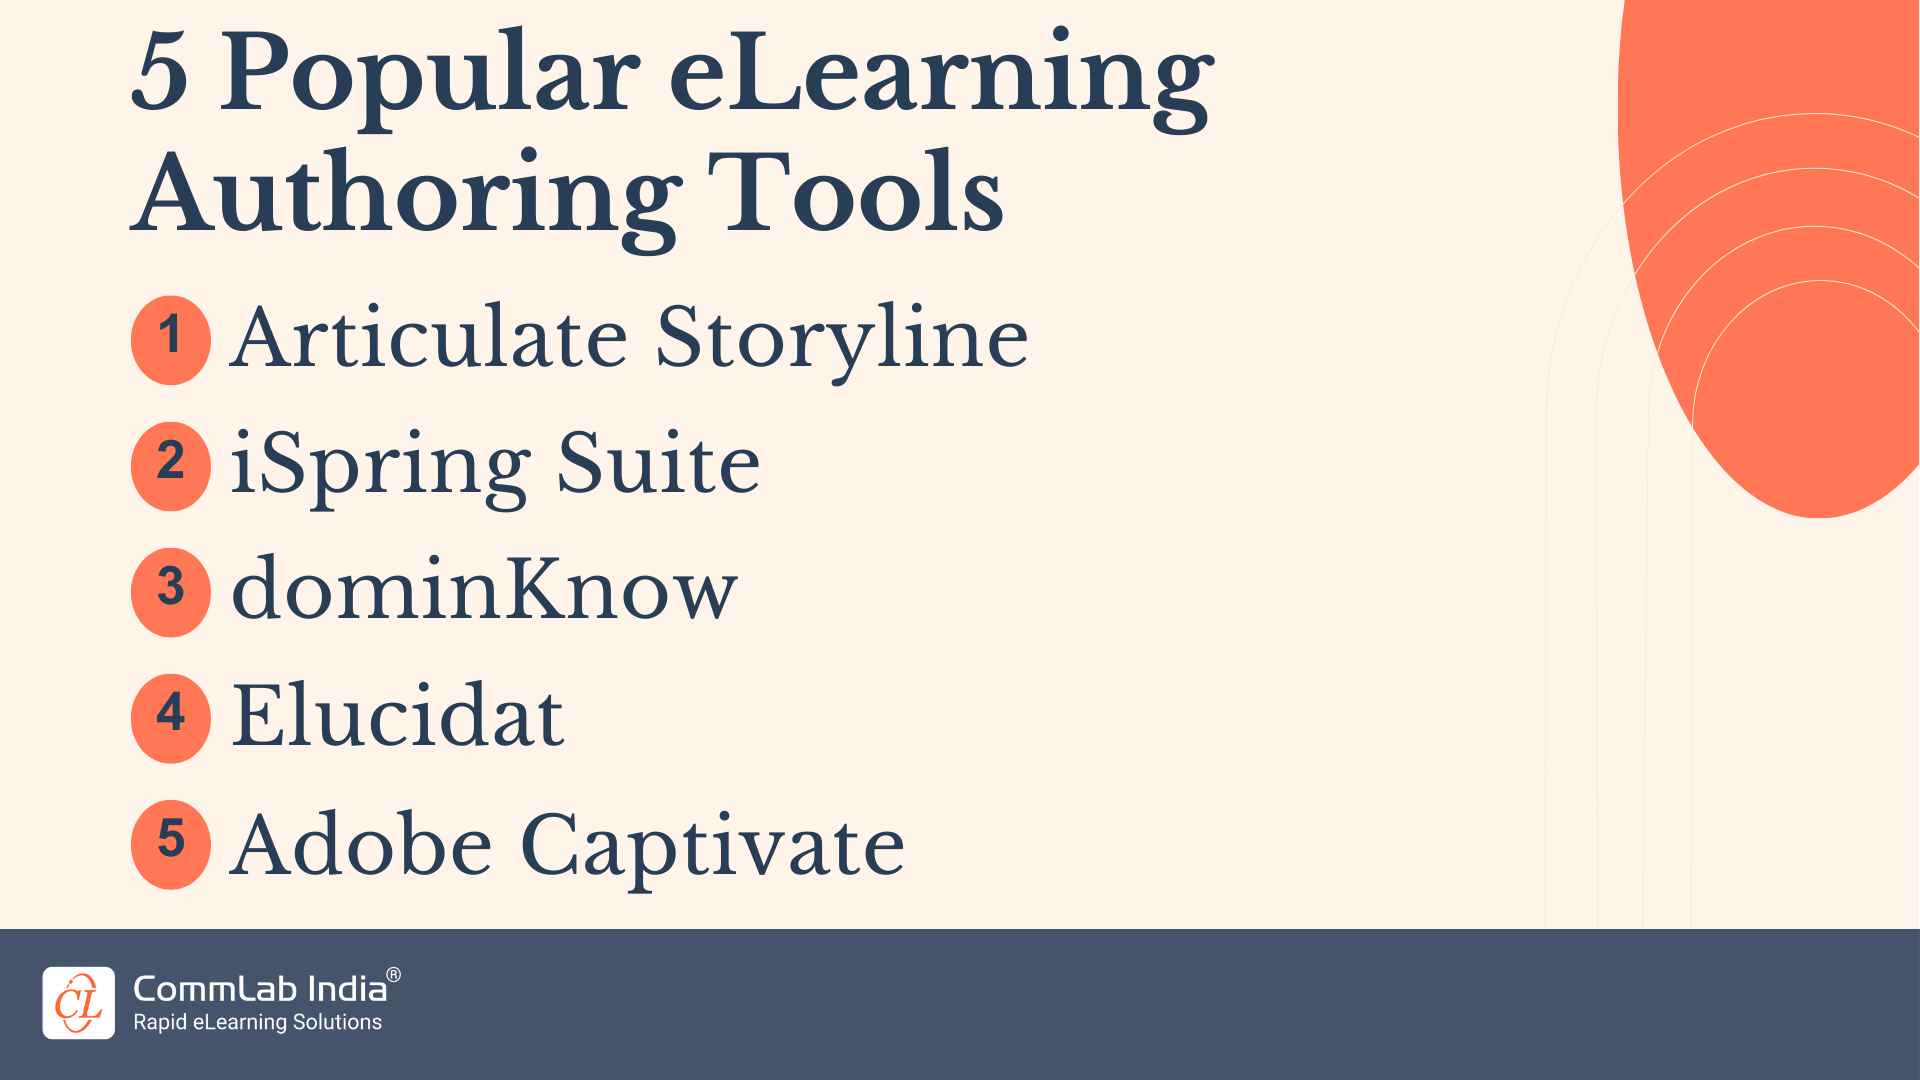 5 Popular eLearning Authoring Tools